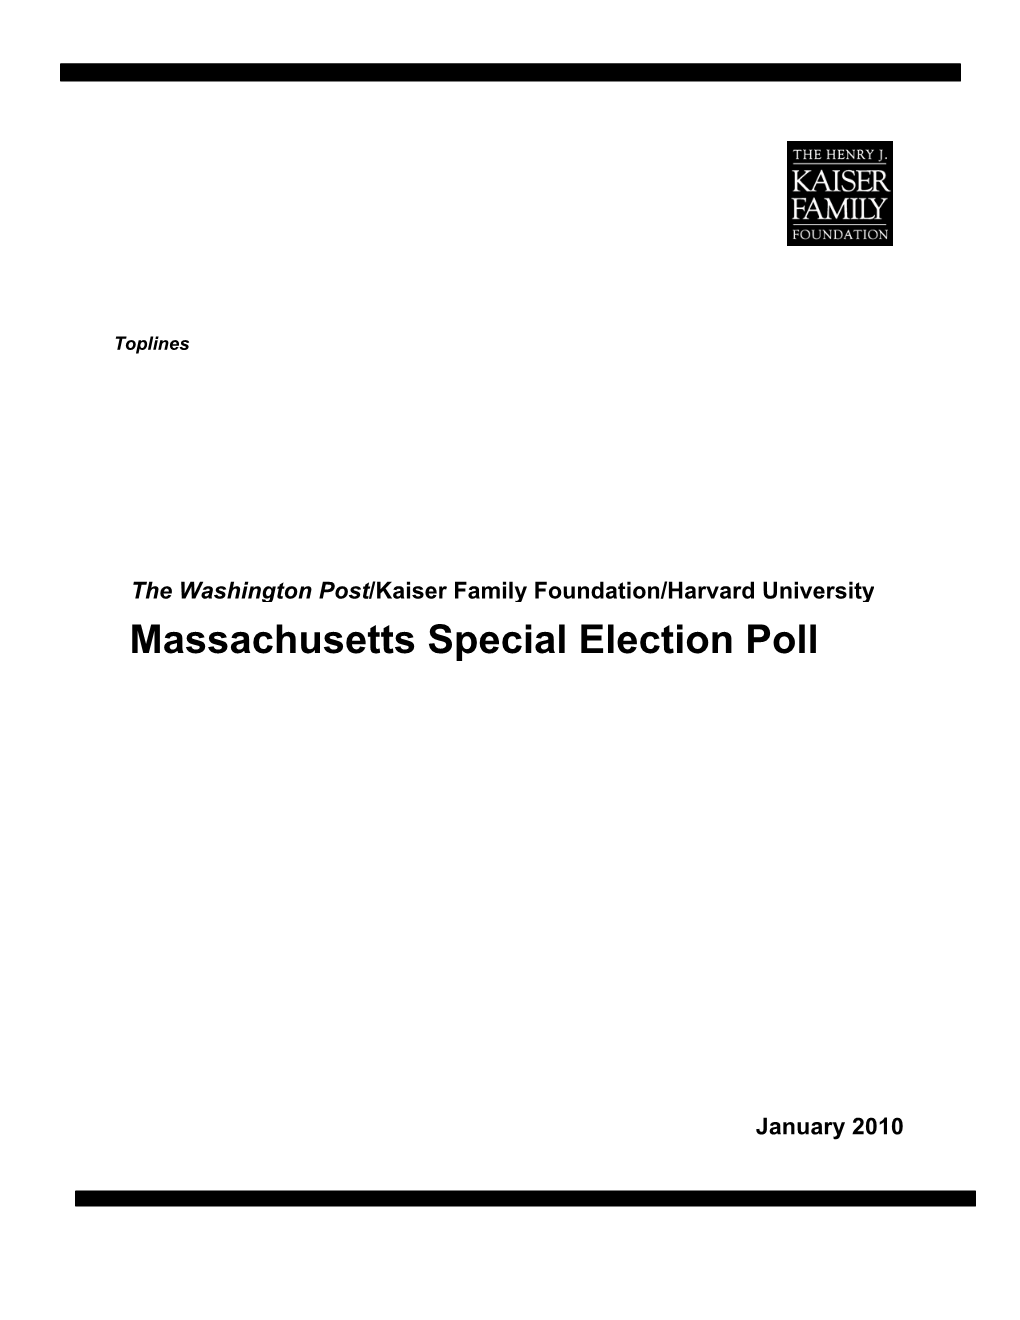 Massachusetts Special Election Poll